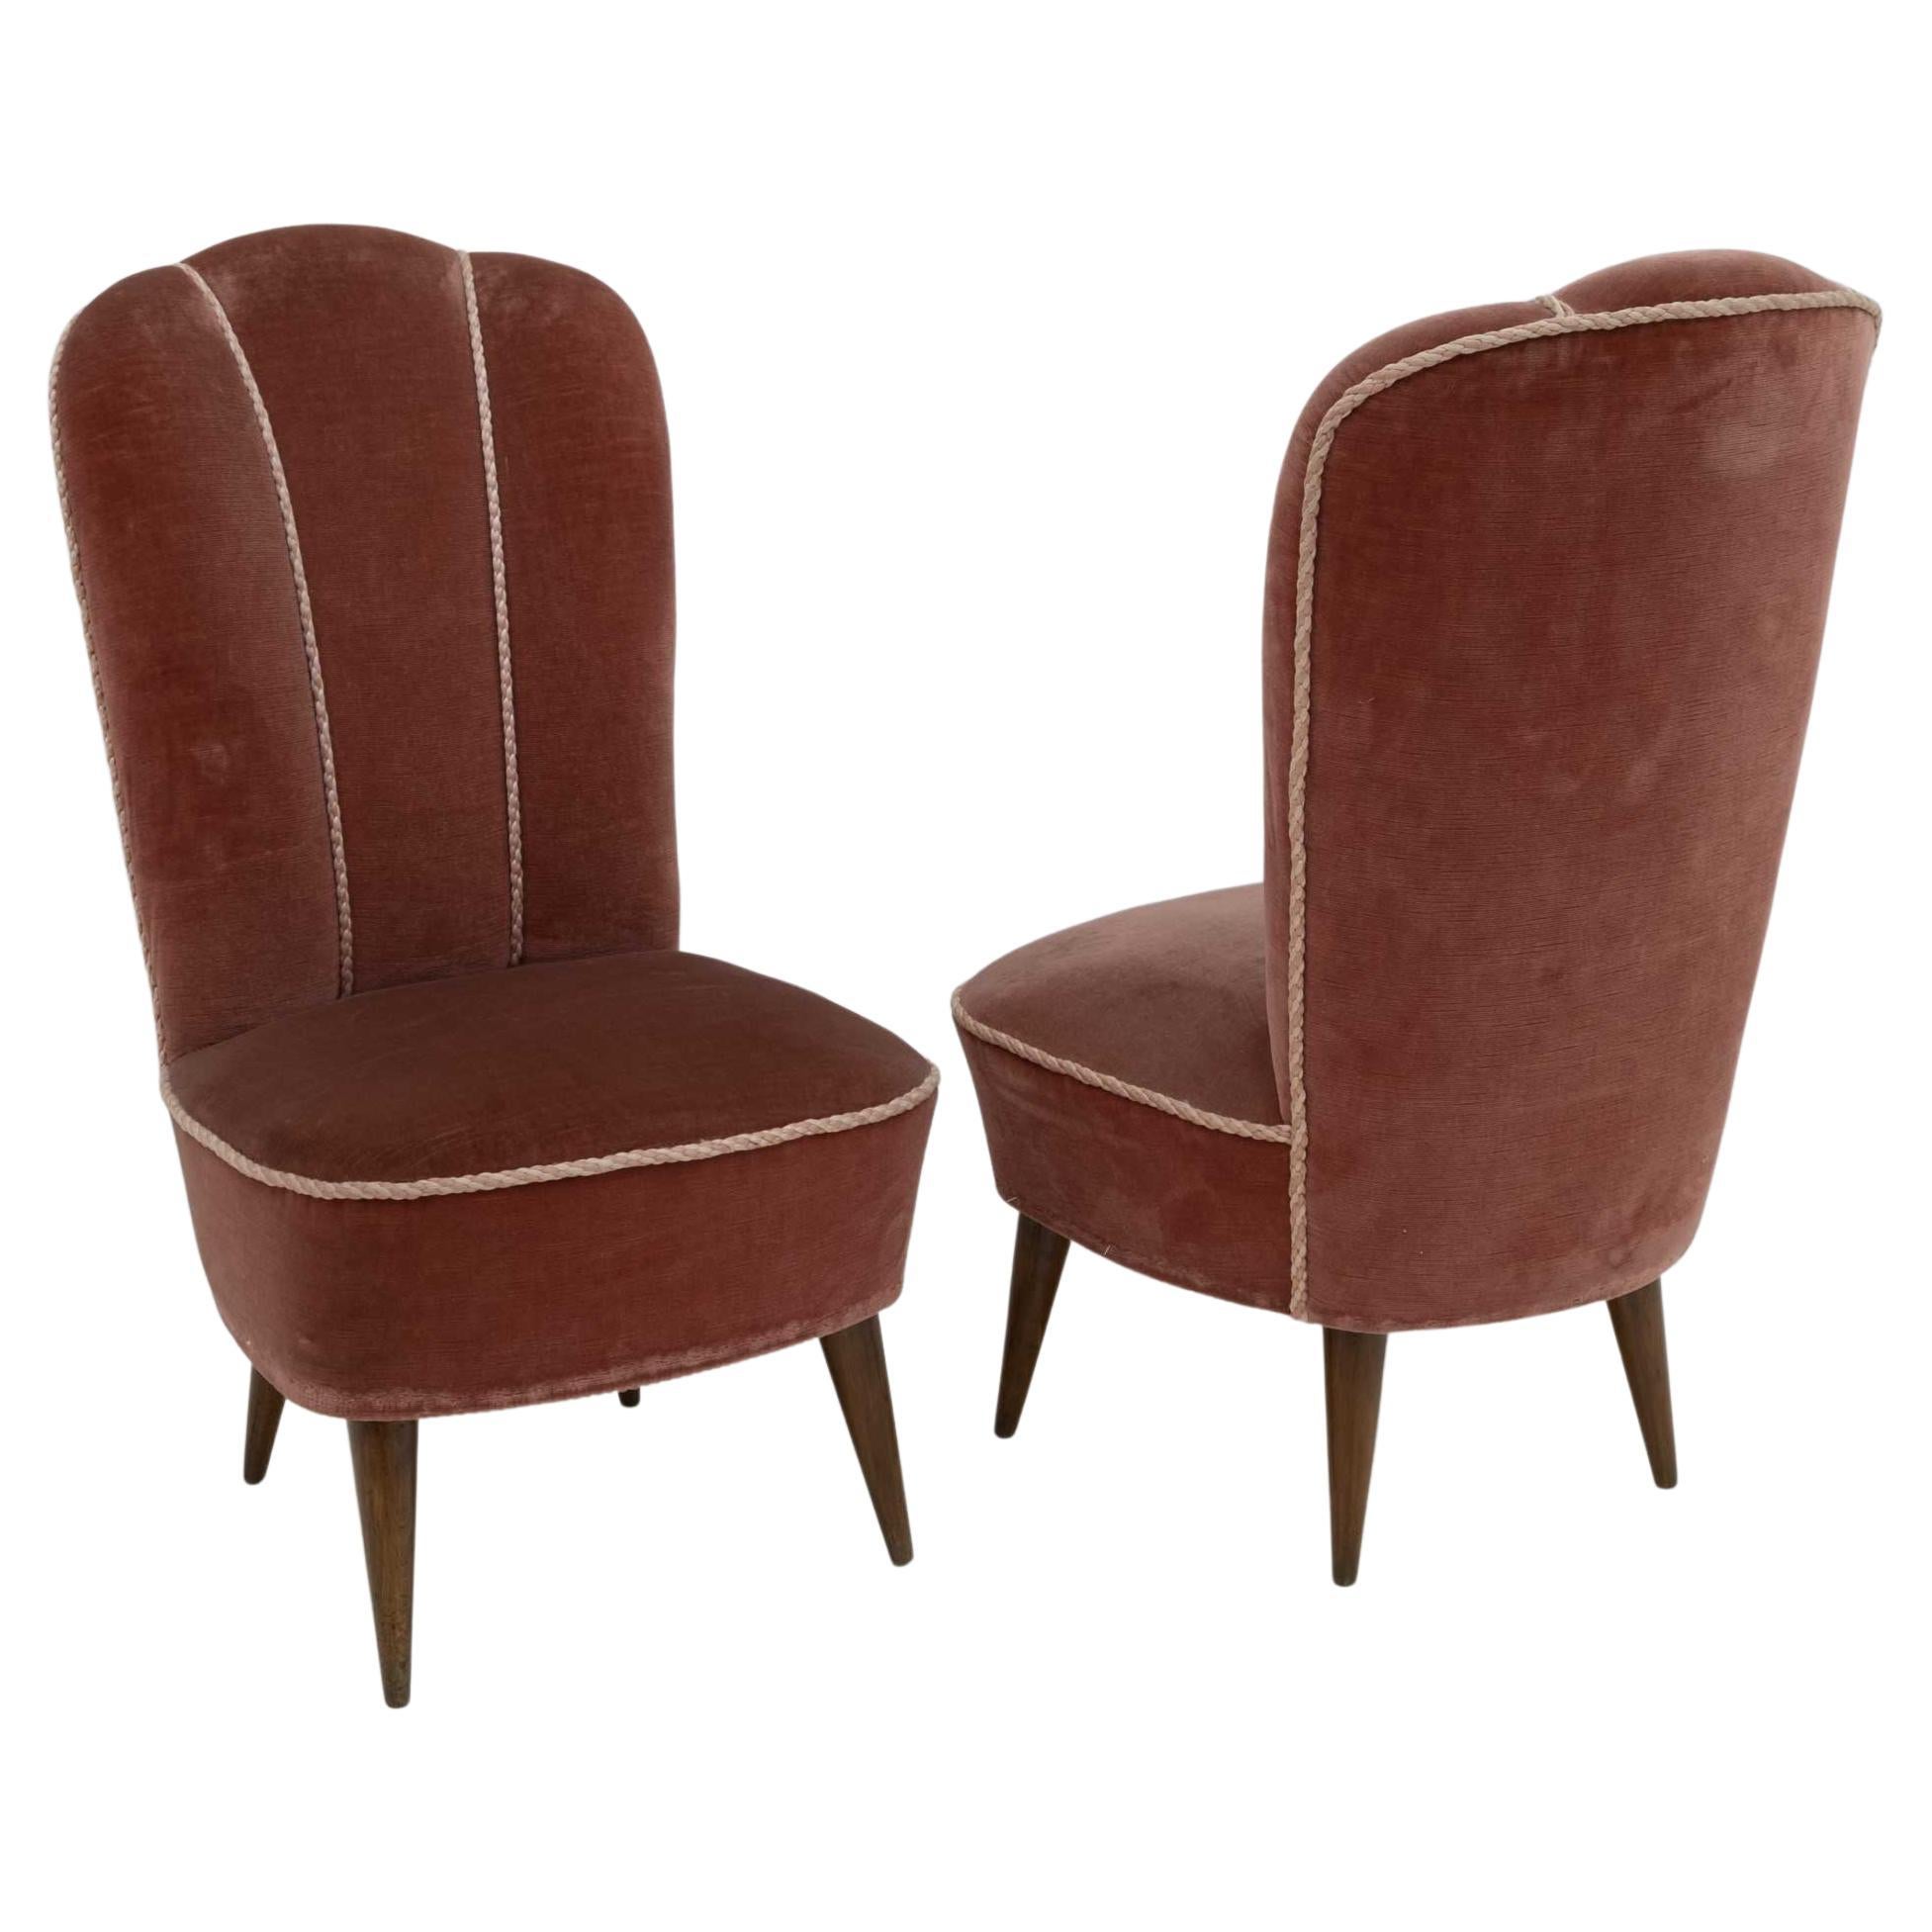 Attributed Gio Ponti Mid-Century Italian Small Armchairs by ISA Bergamo, Pair For Sale